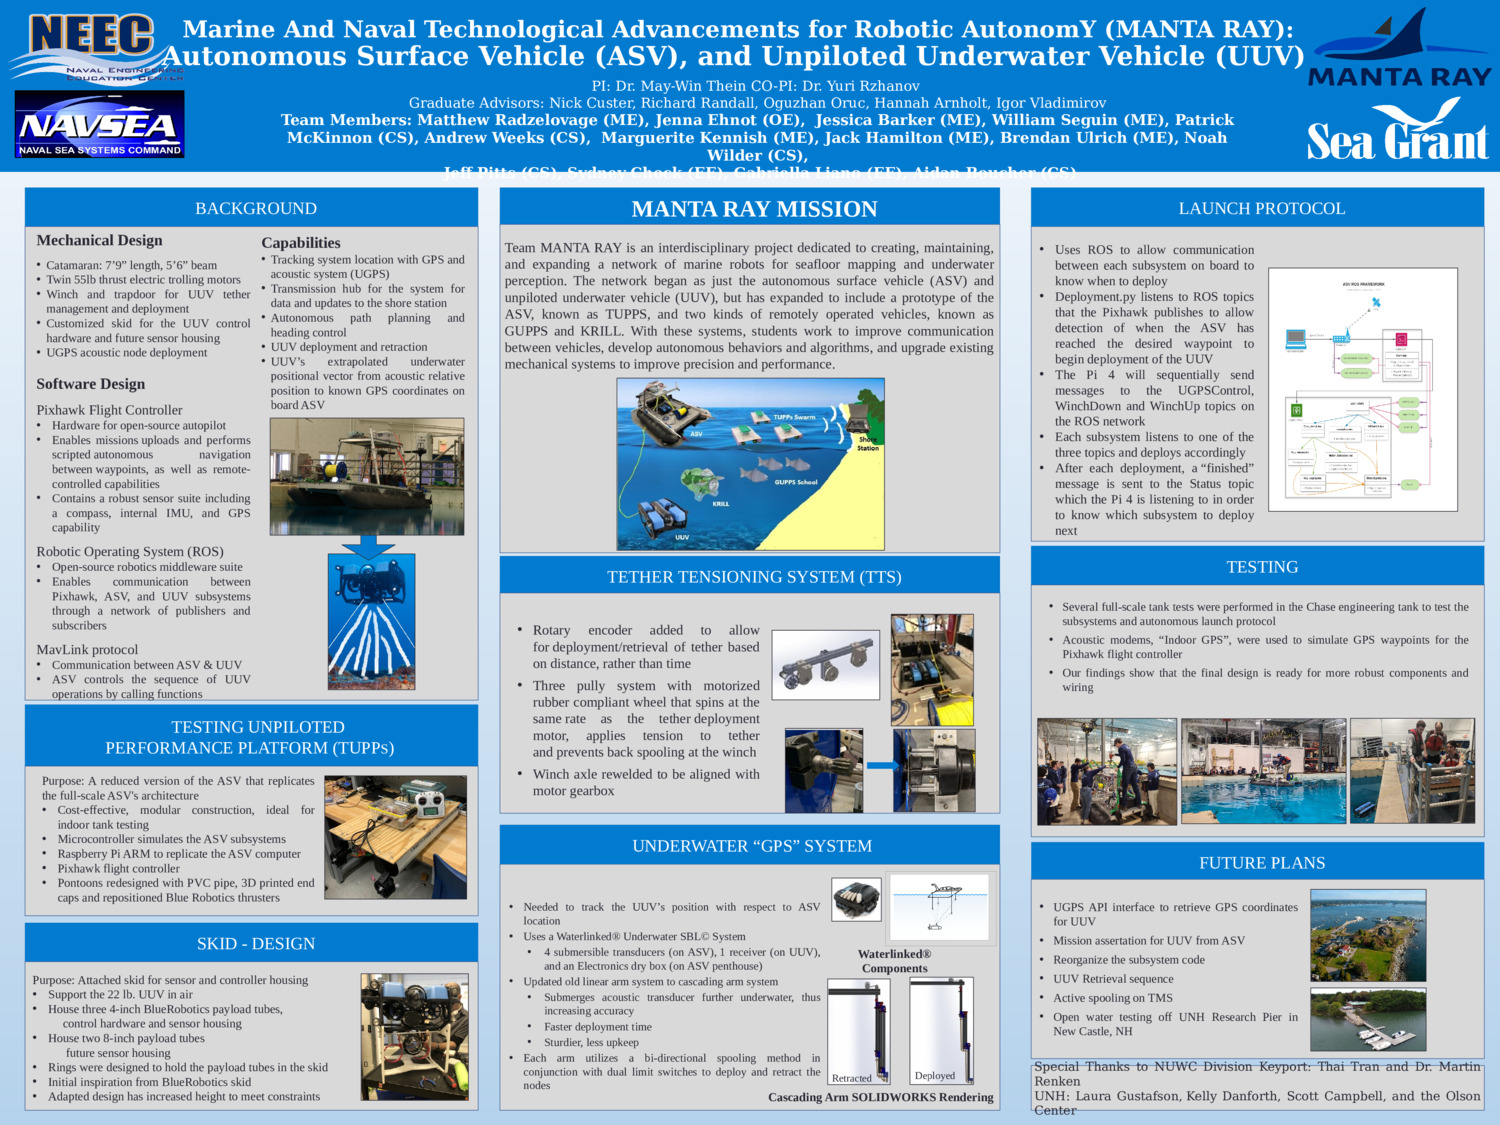 Marine And Naval Technological Advancements For Robotic Autonomy (Manta Ray):​ Autonomous Surface Vehicle (Asv), And Unpiloted Underwater Vehicle (Uuv) by mthein